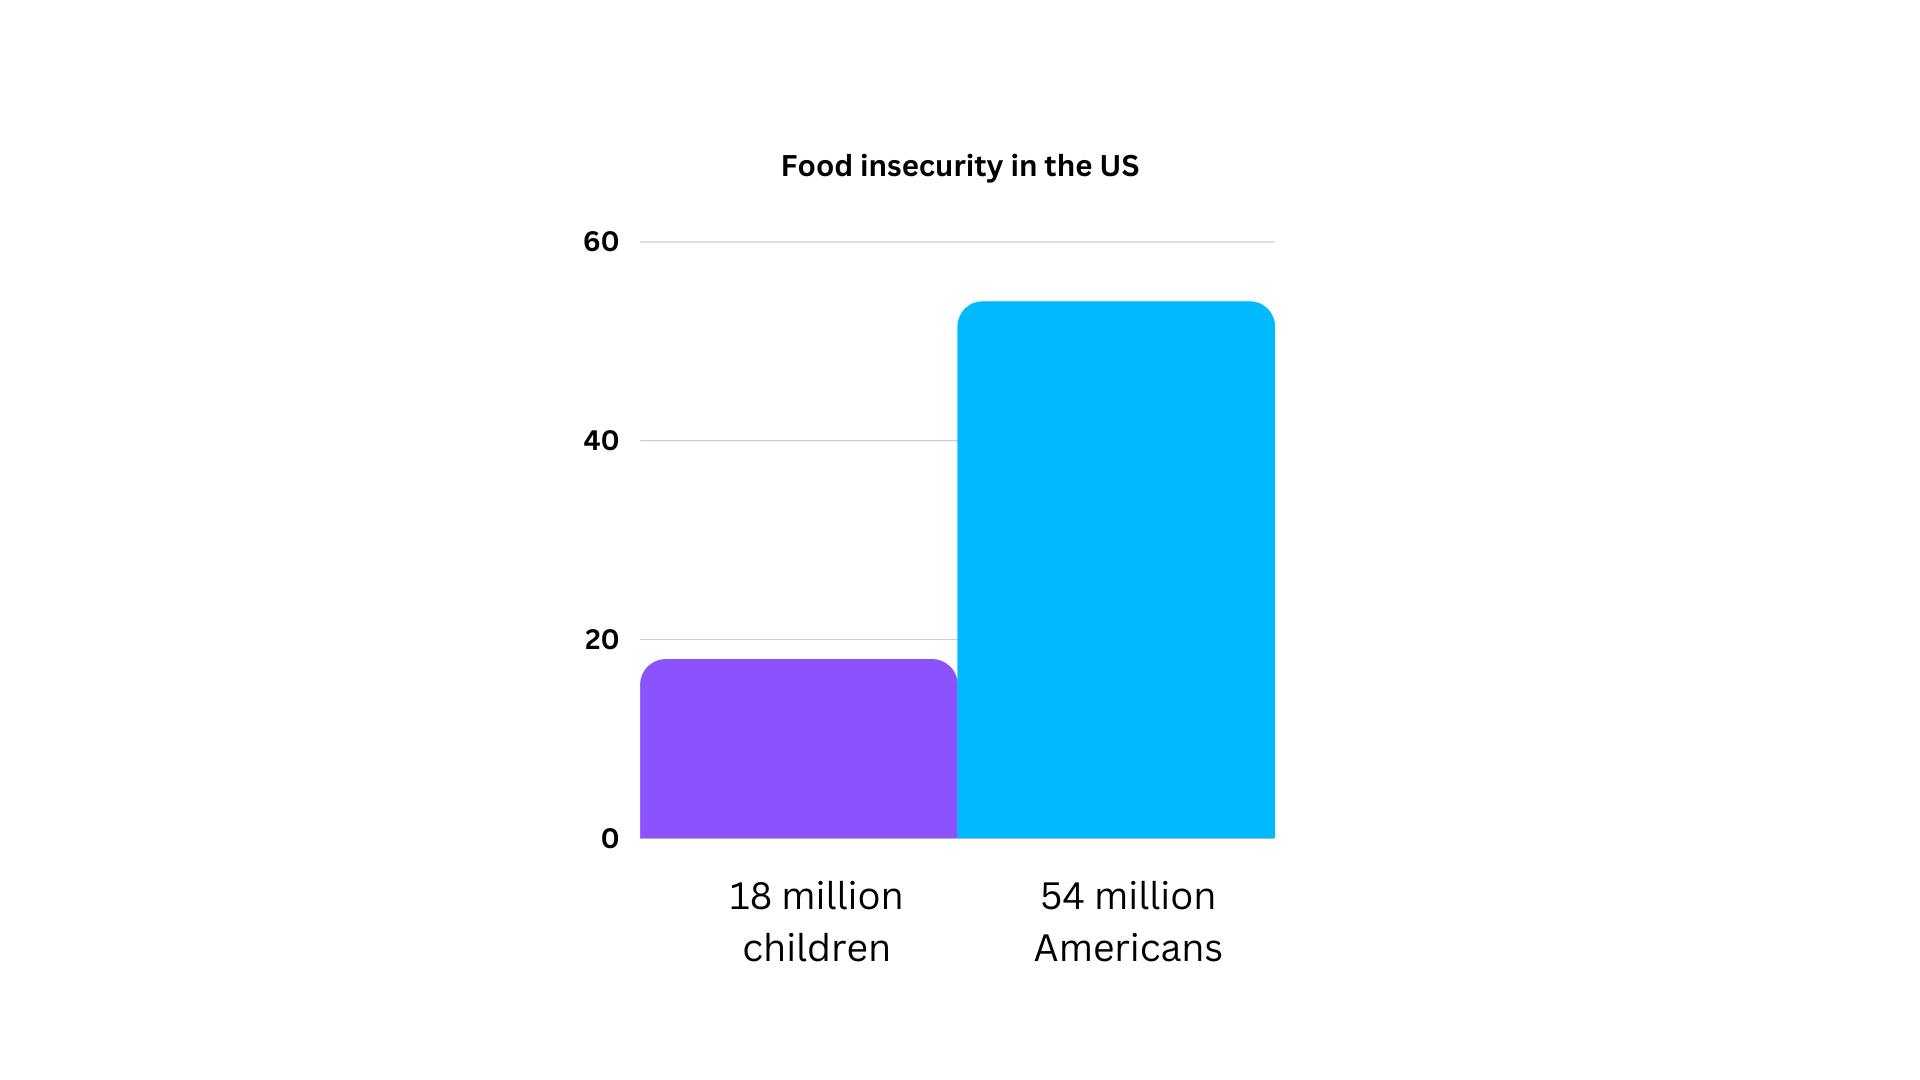 Food waste statistics - The battle of food insecurity in the US